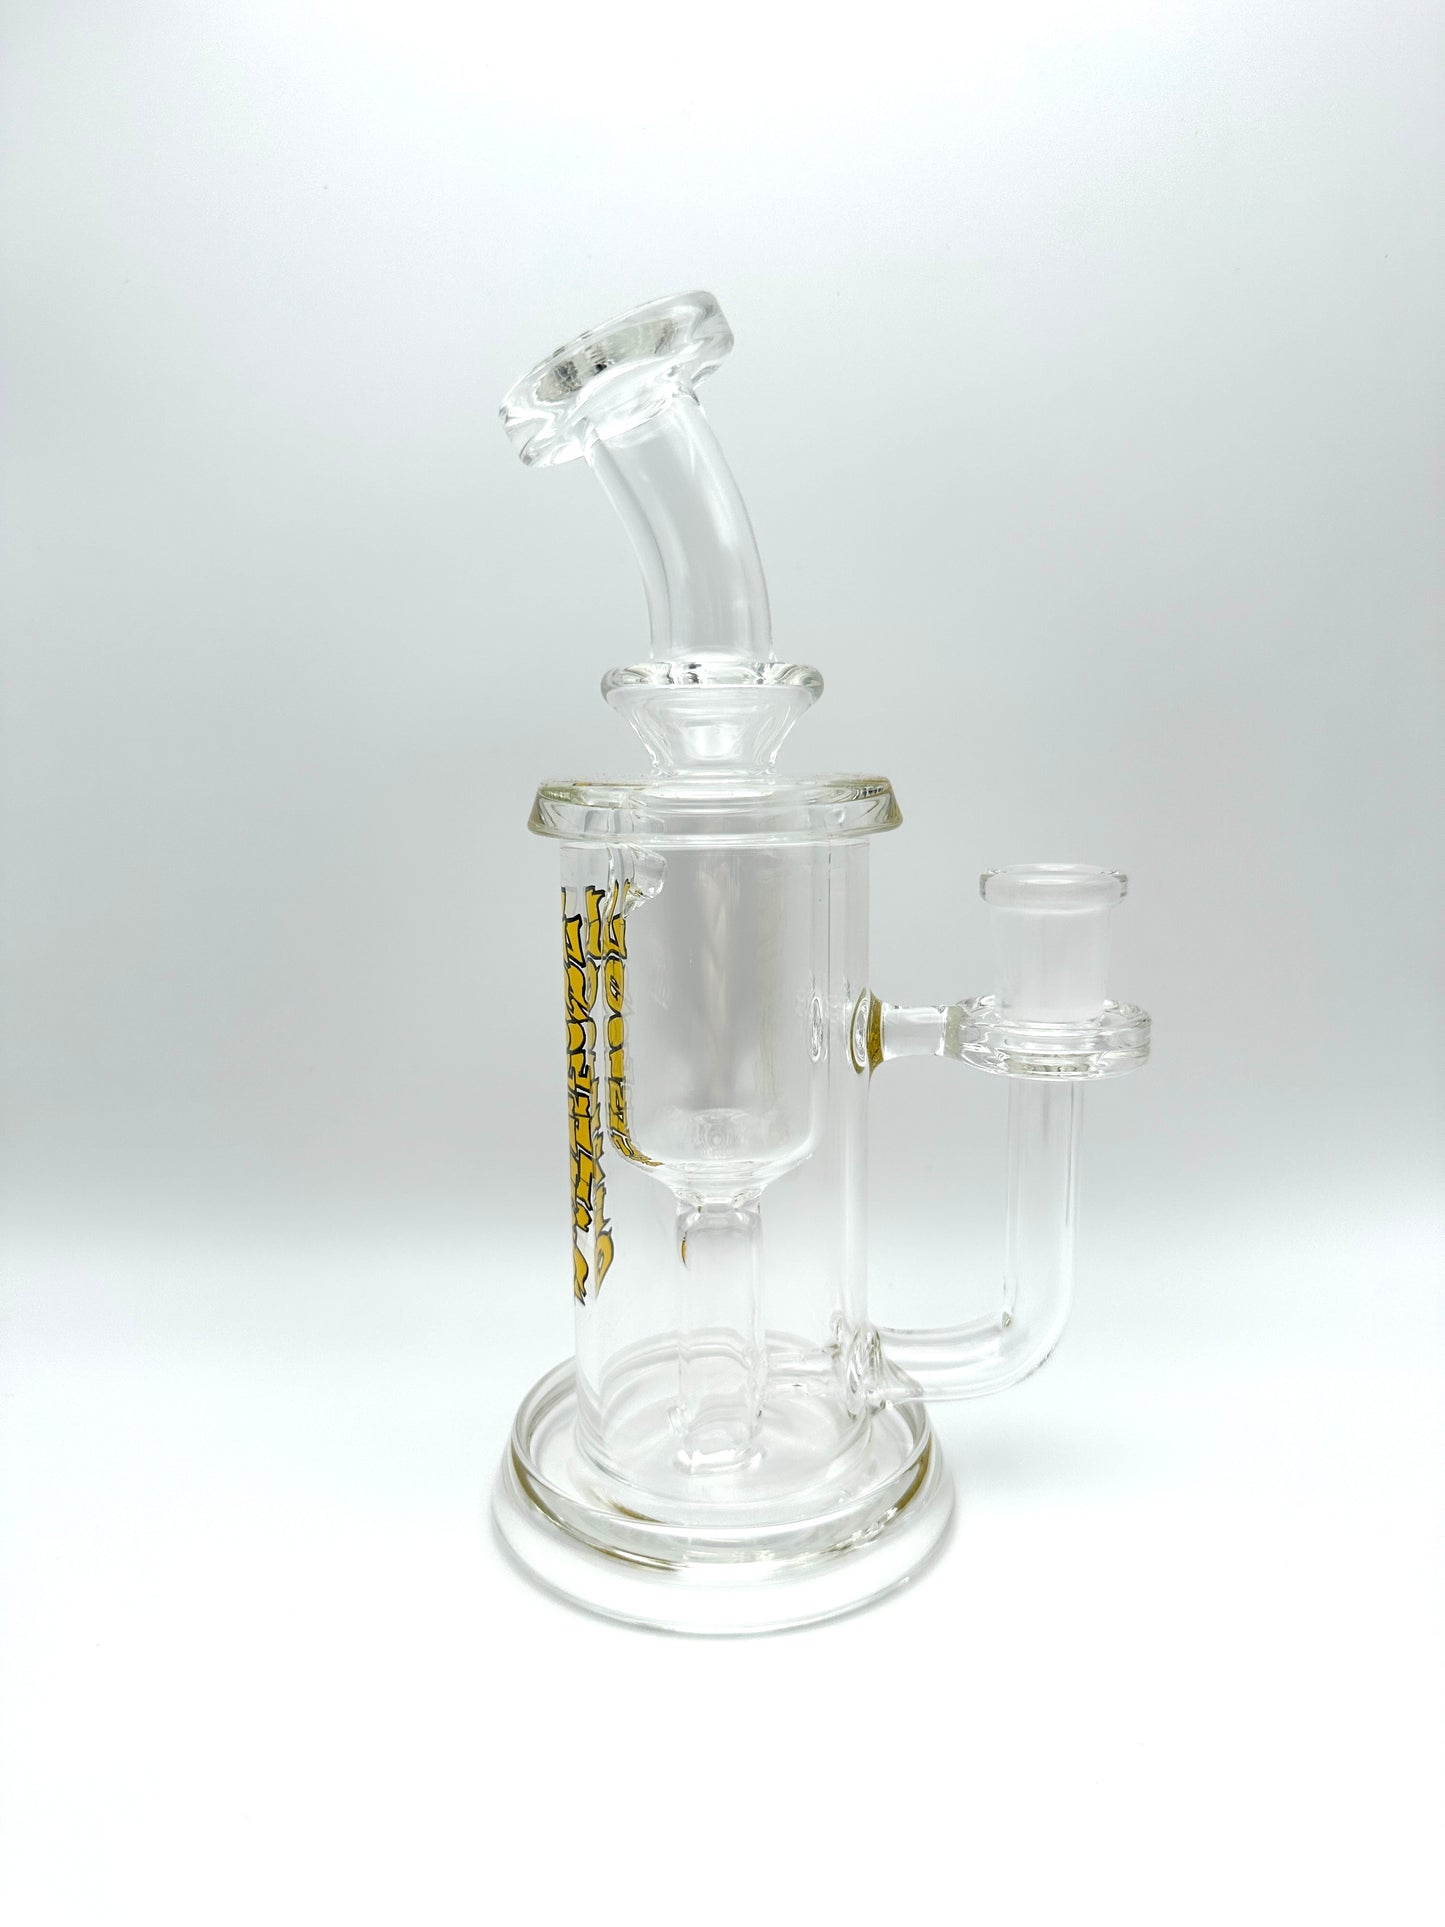 Leisure Clear Incycler